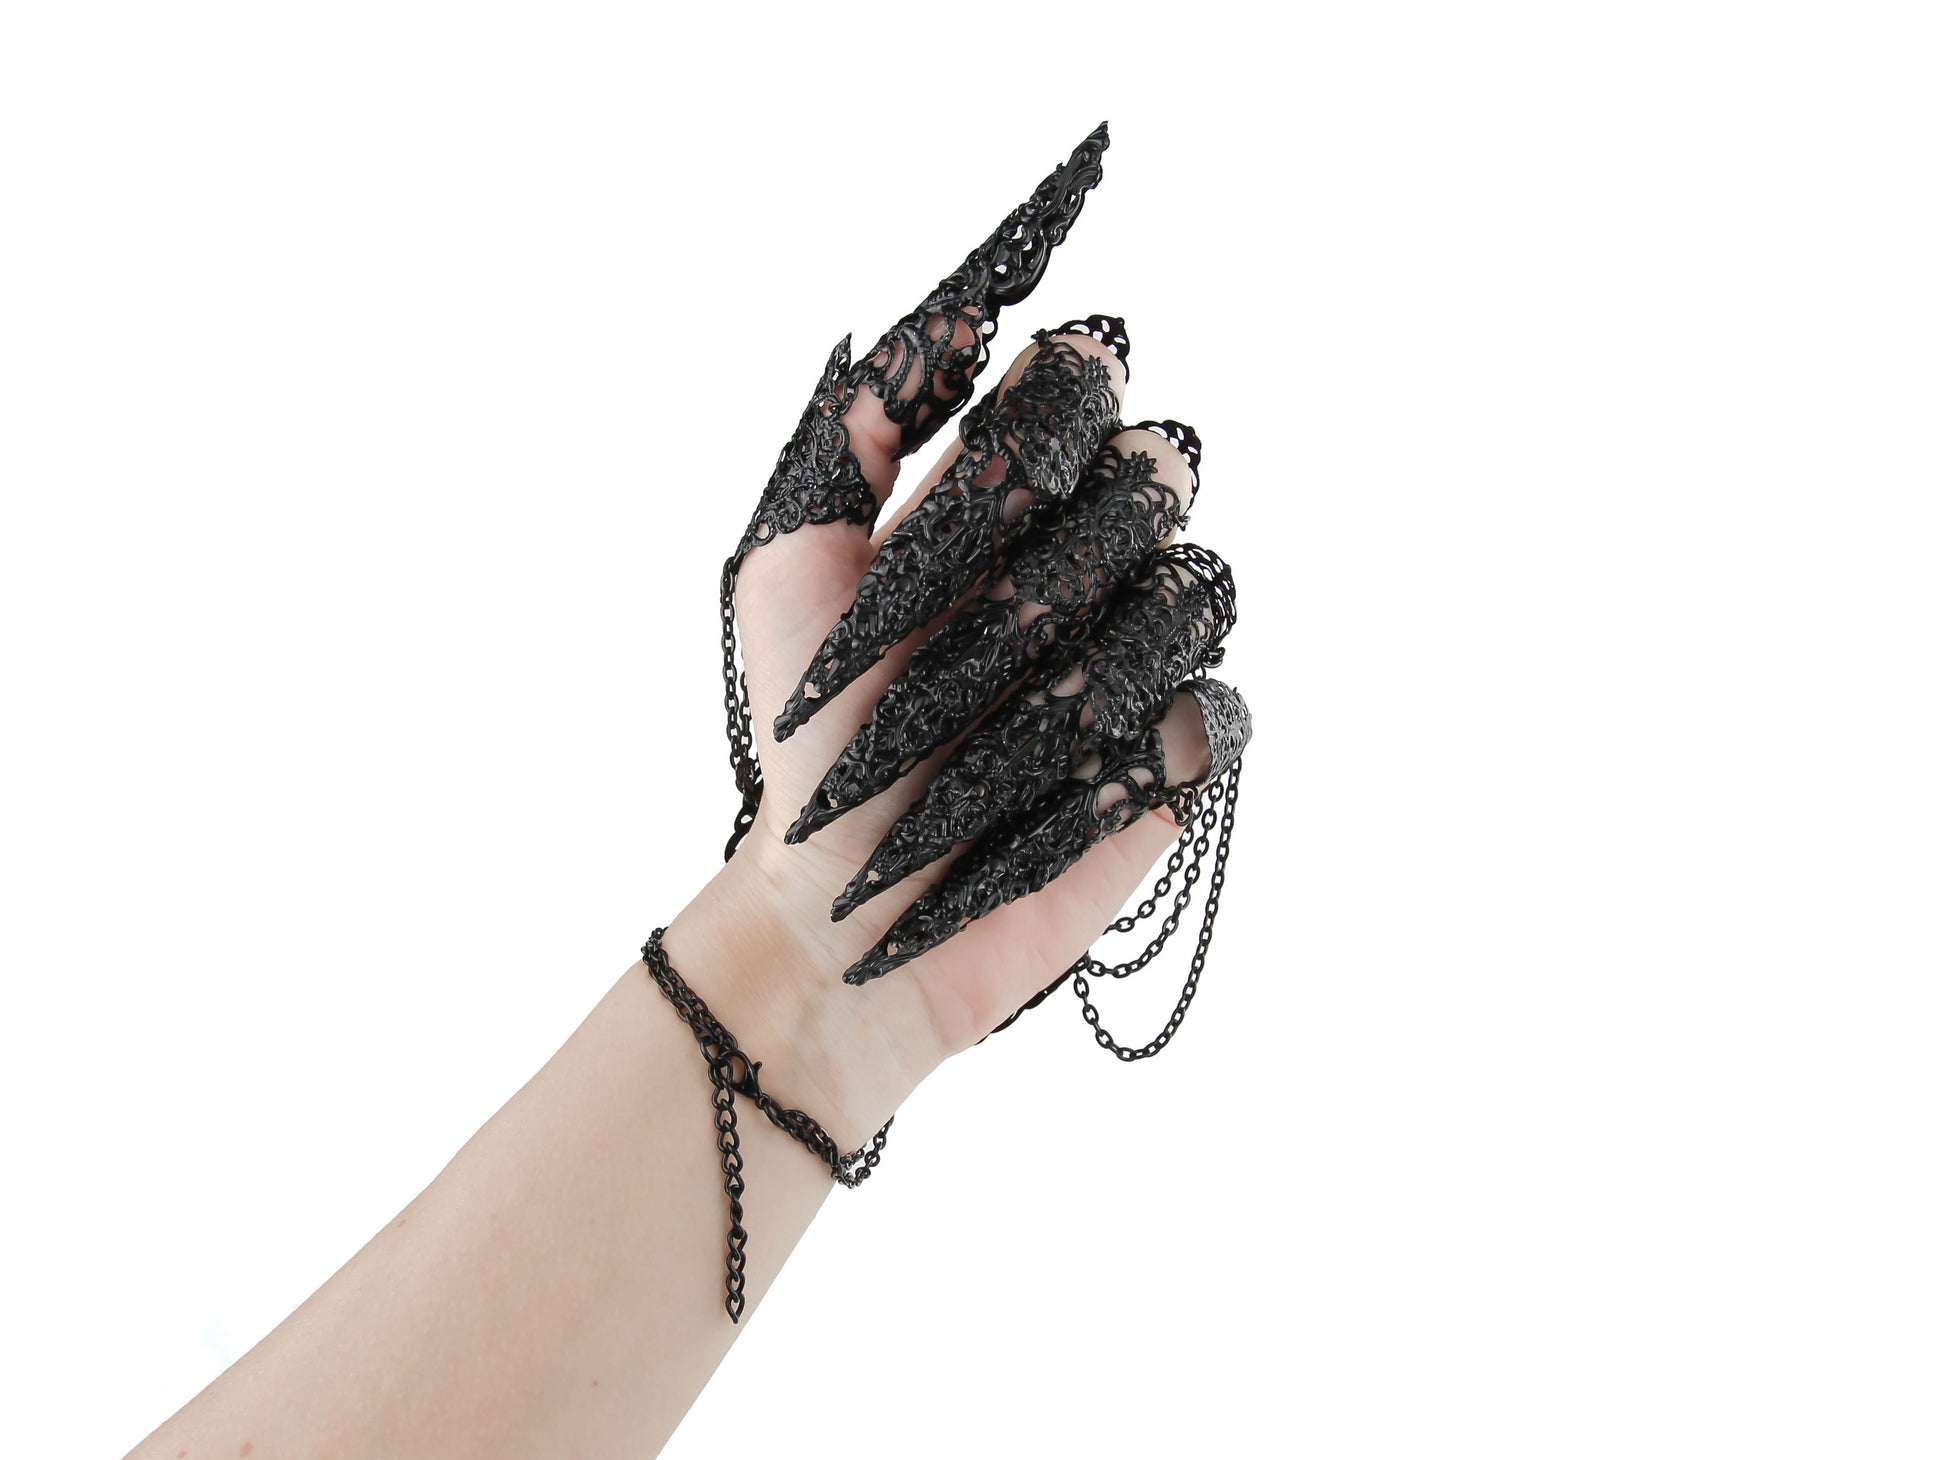 An almost closed hand dramatically showcases Myril Jewels' black lace finger armor, intertwined with chains, perfect for gothic-chic, neo-gothic, and whimsigoth styles. This handcrafted piece is a quintessential accessory for those who revel in witchcore aesthetics, making it an ideal selection for Halloween or punk fashion statements.